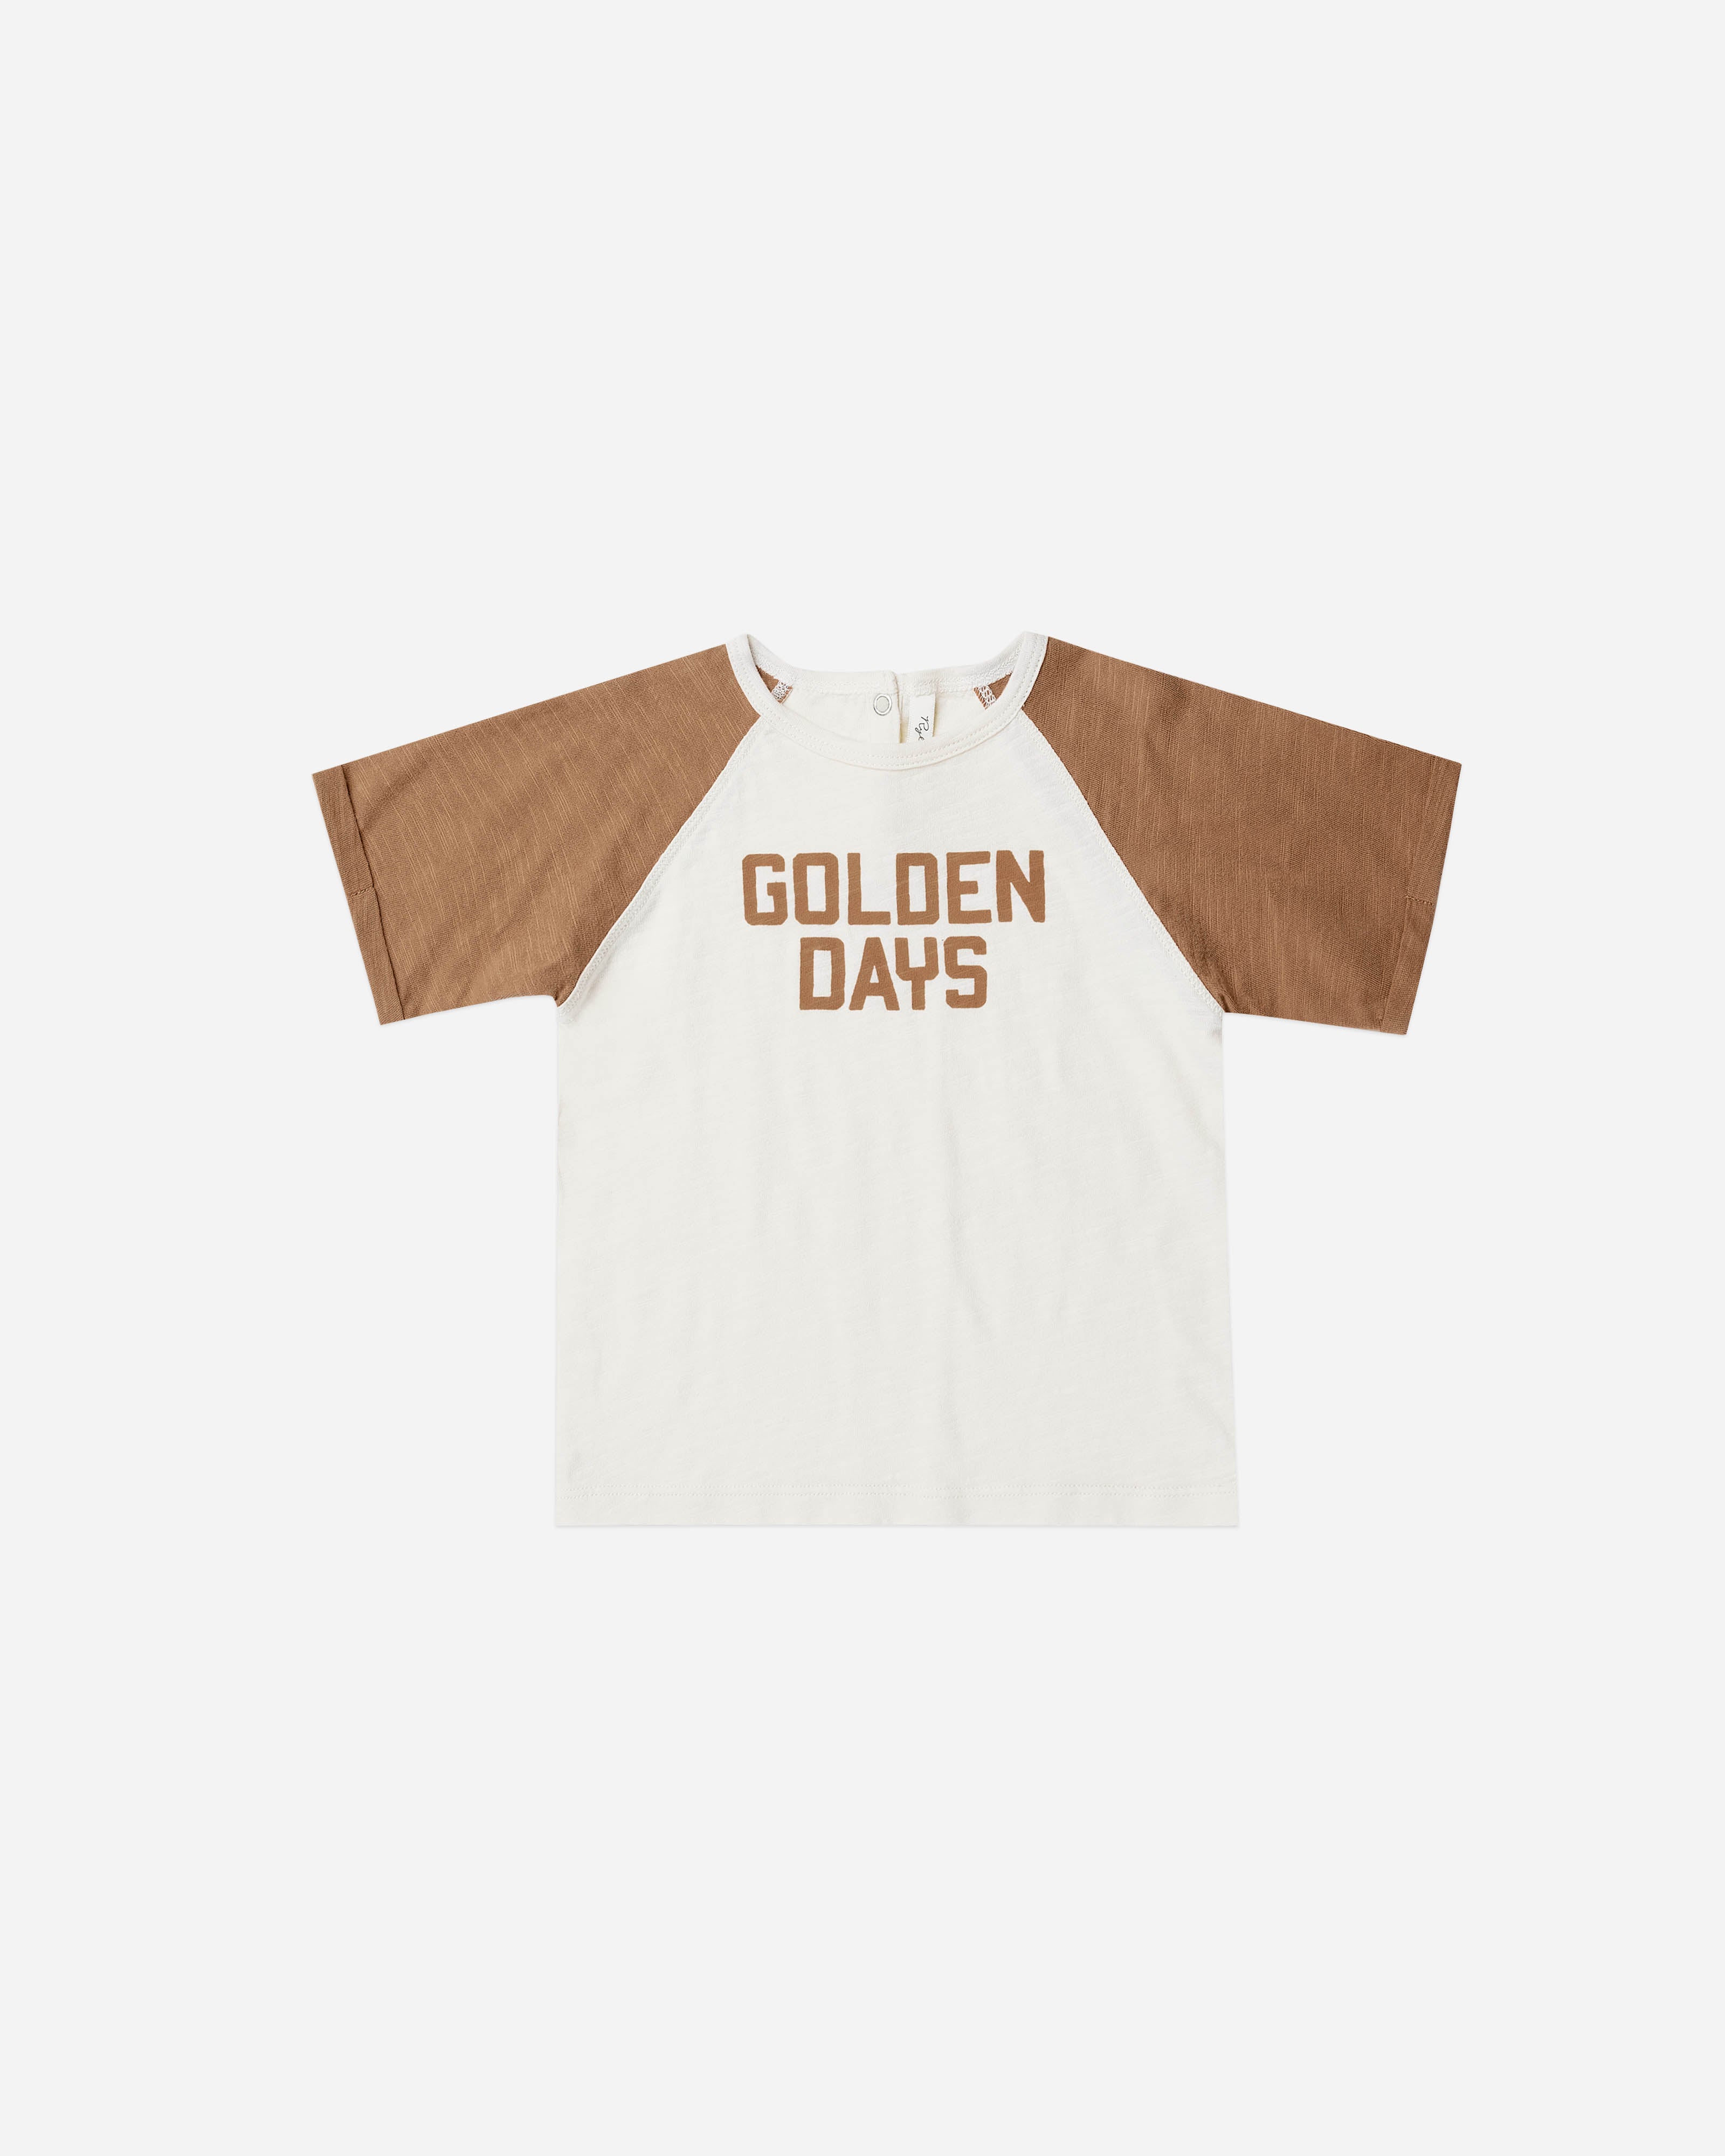 raglan tee || golden days - Rylee + Cru | Kids Clothes | Trendy Baby Clothes | Modern Infant Outfits |